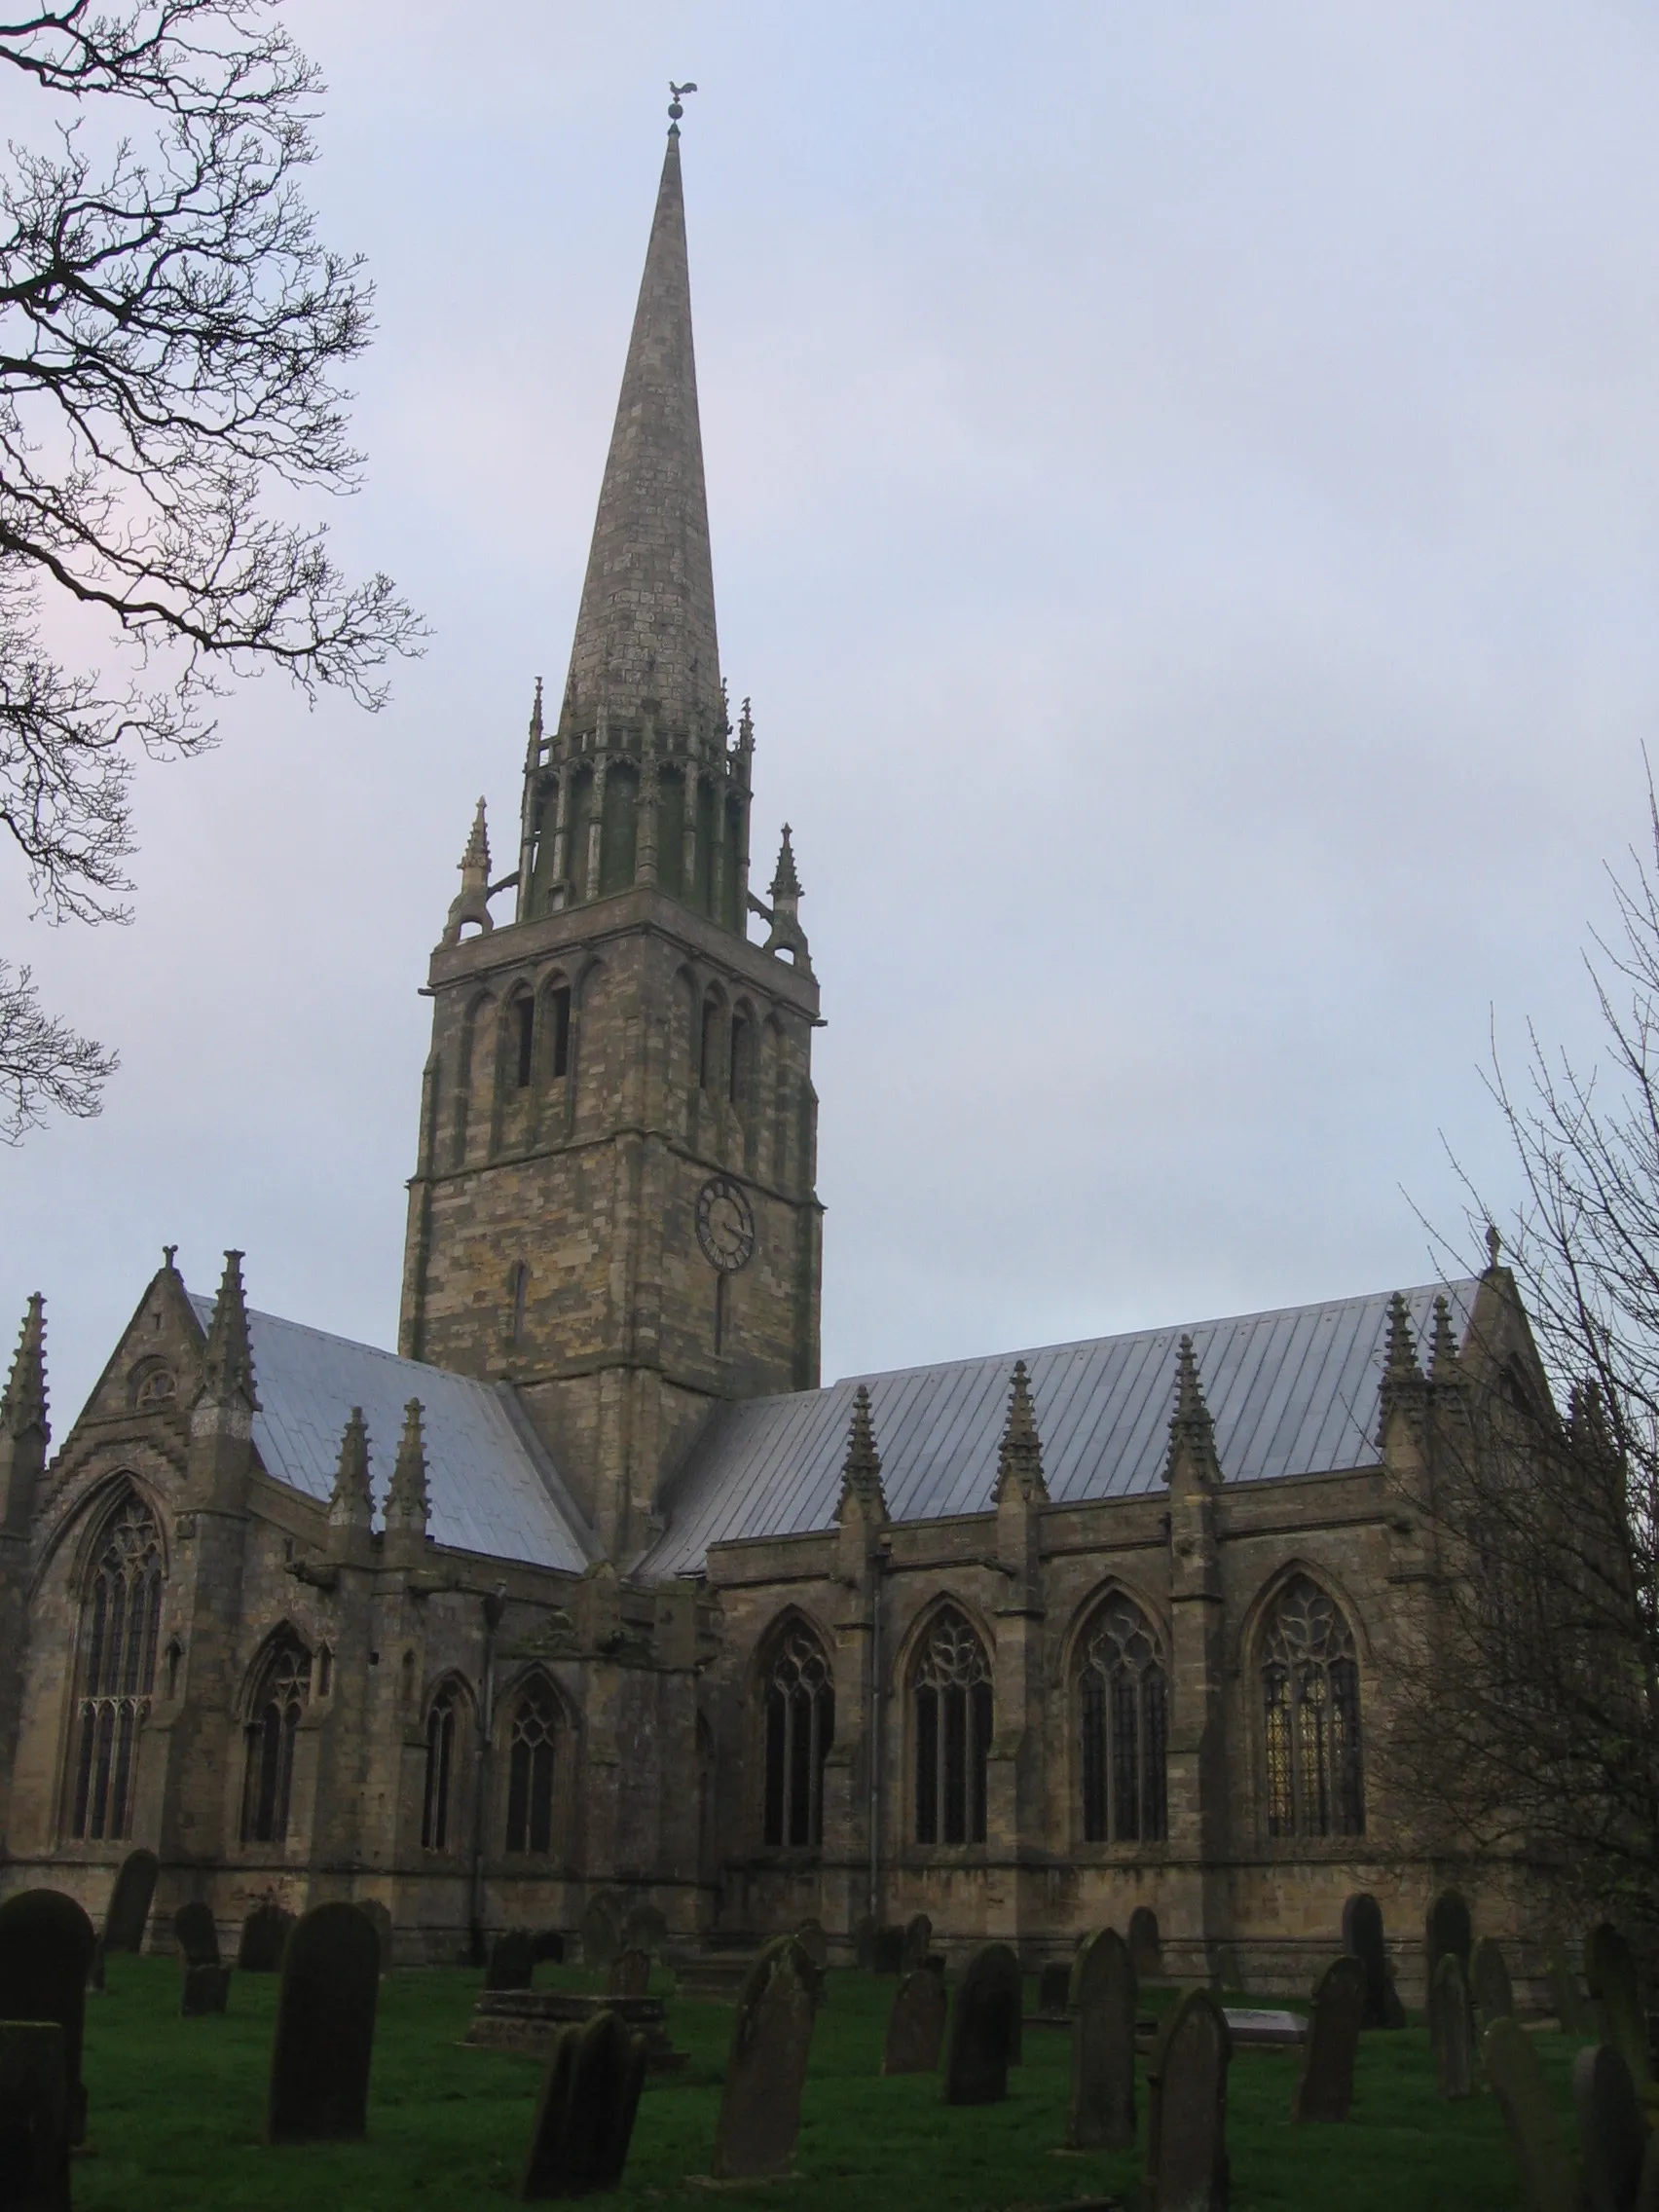 Photo showing: St Patrick's Church, Patrington, East Riding of Yorkshire, England. Photo taken by me on 22 December 2006.